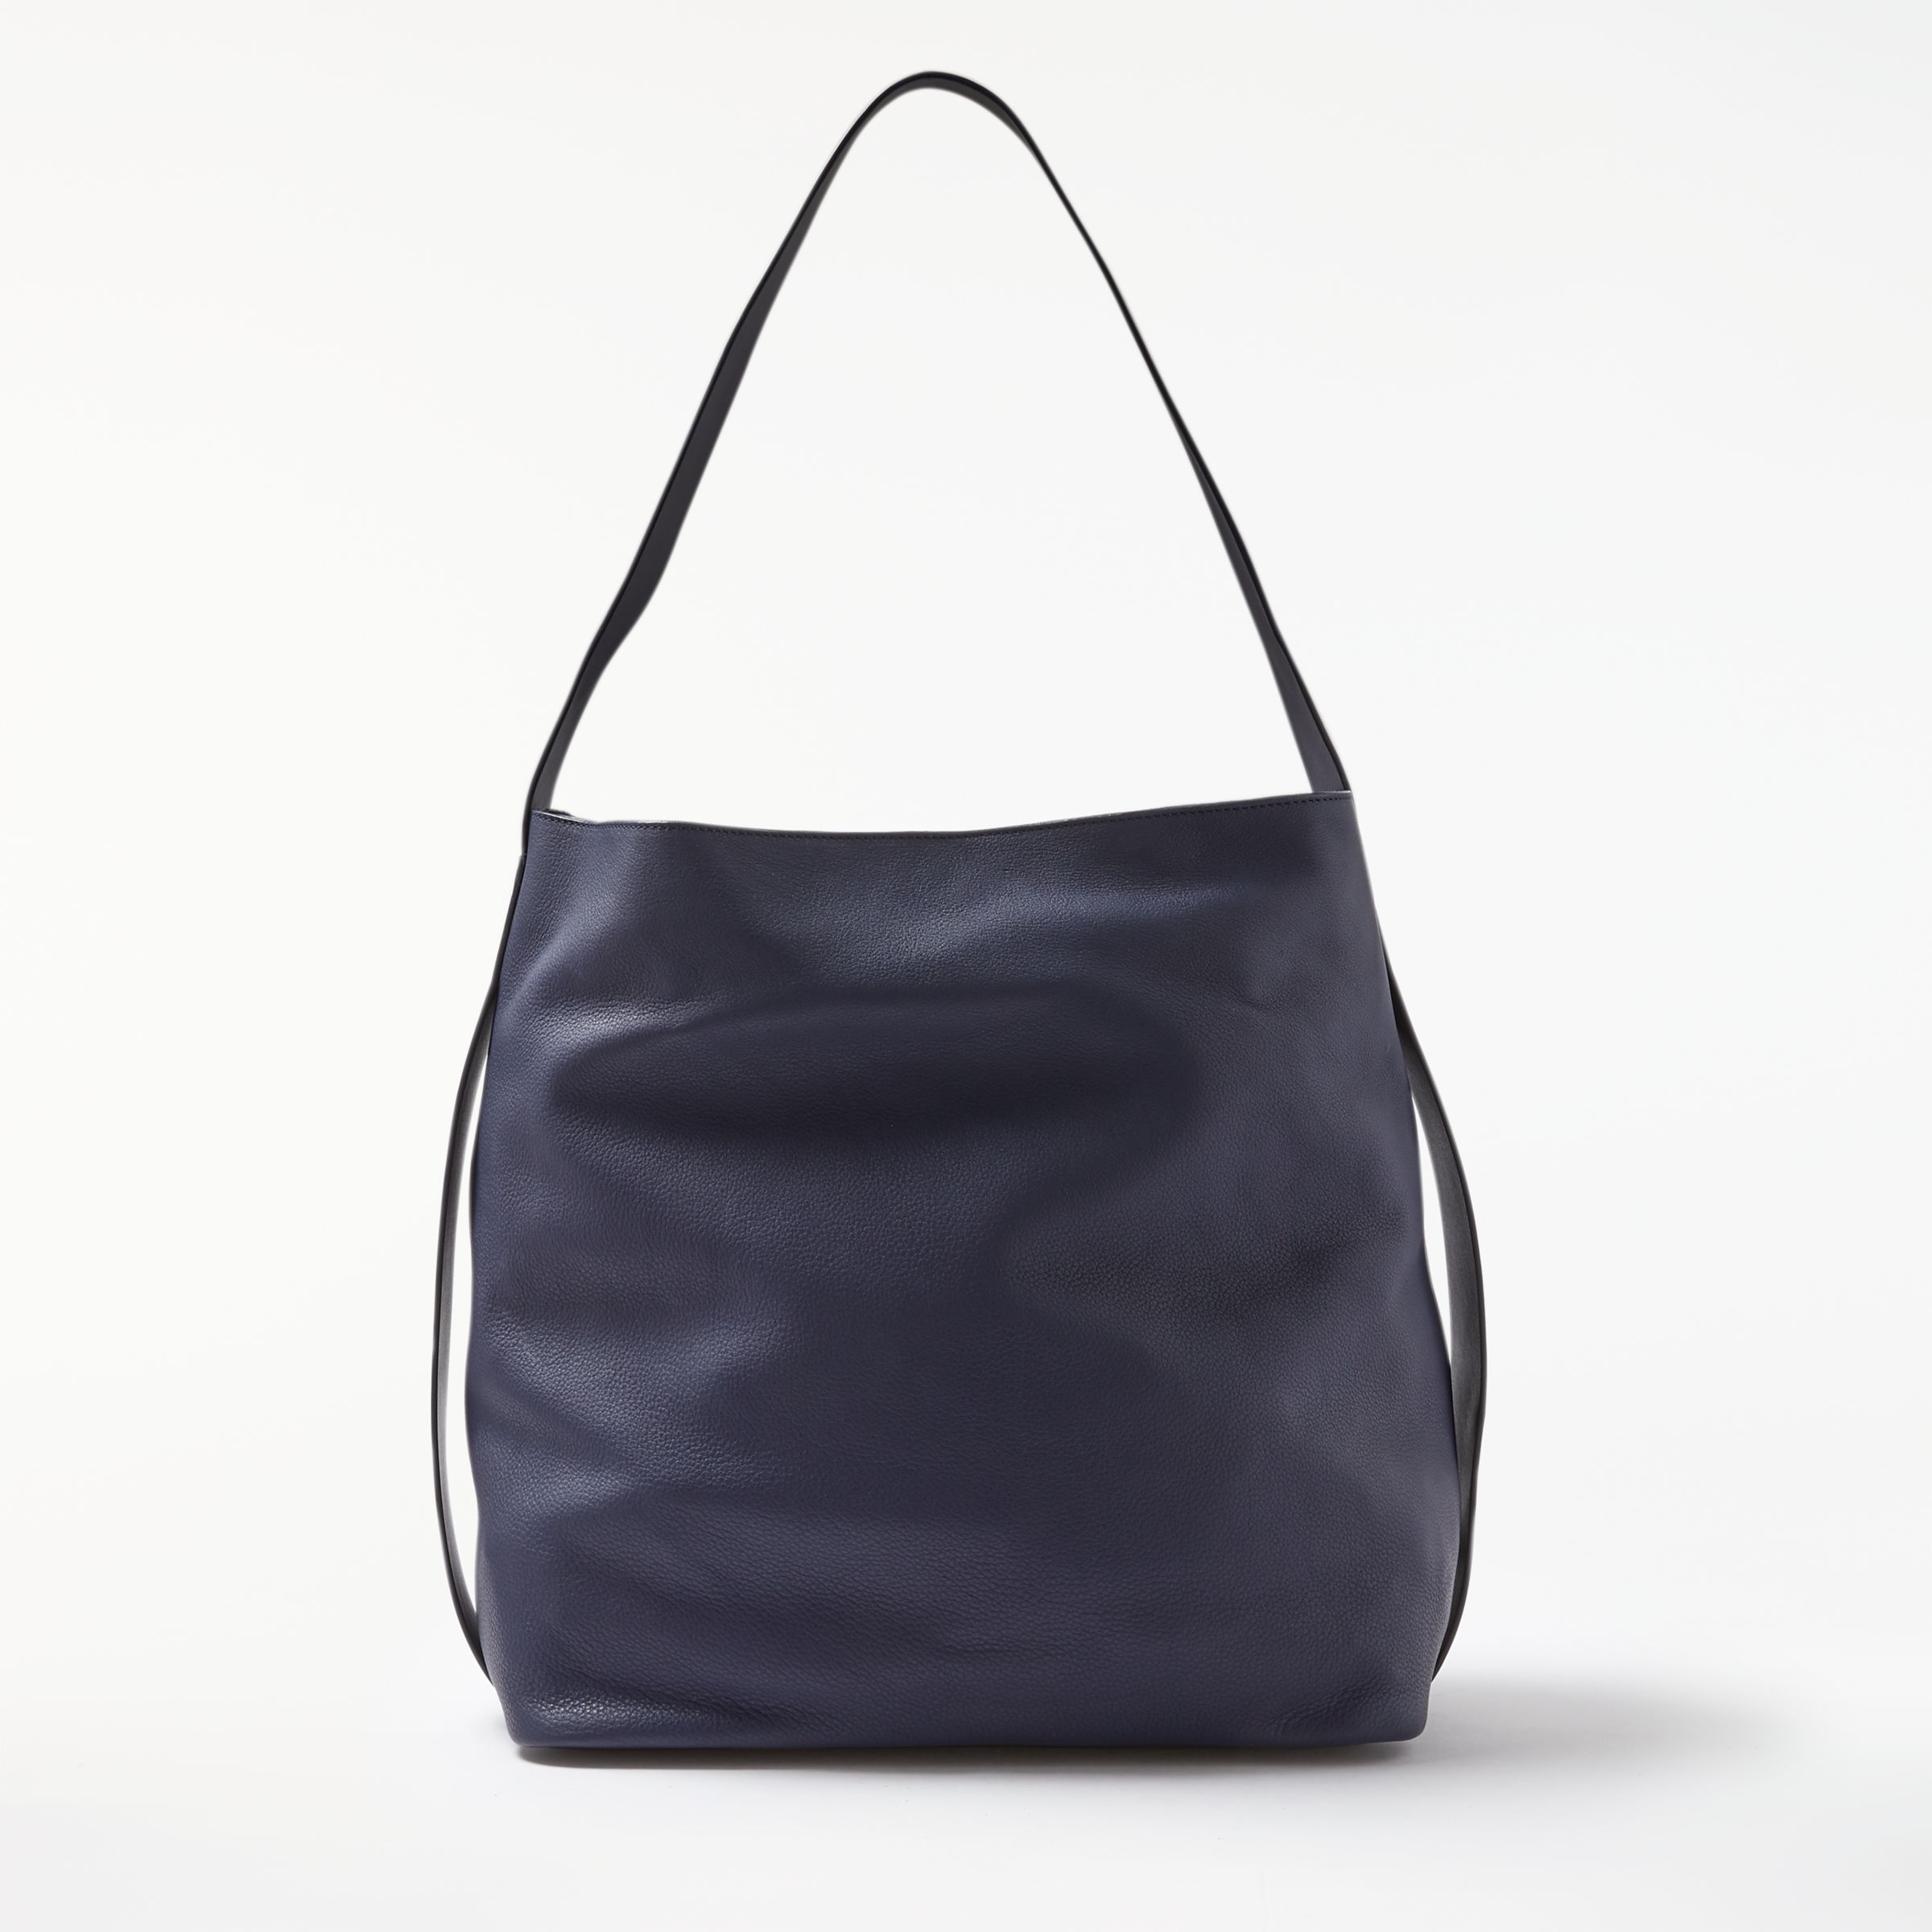 Kin Helen Leather North/South Tote Bag